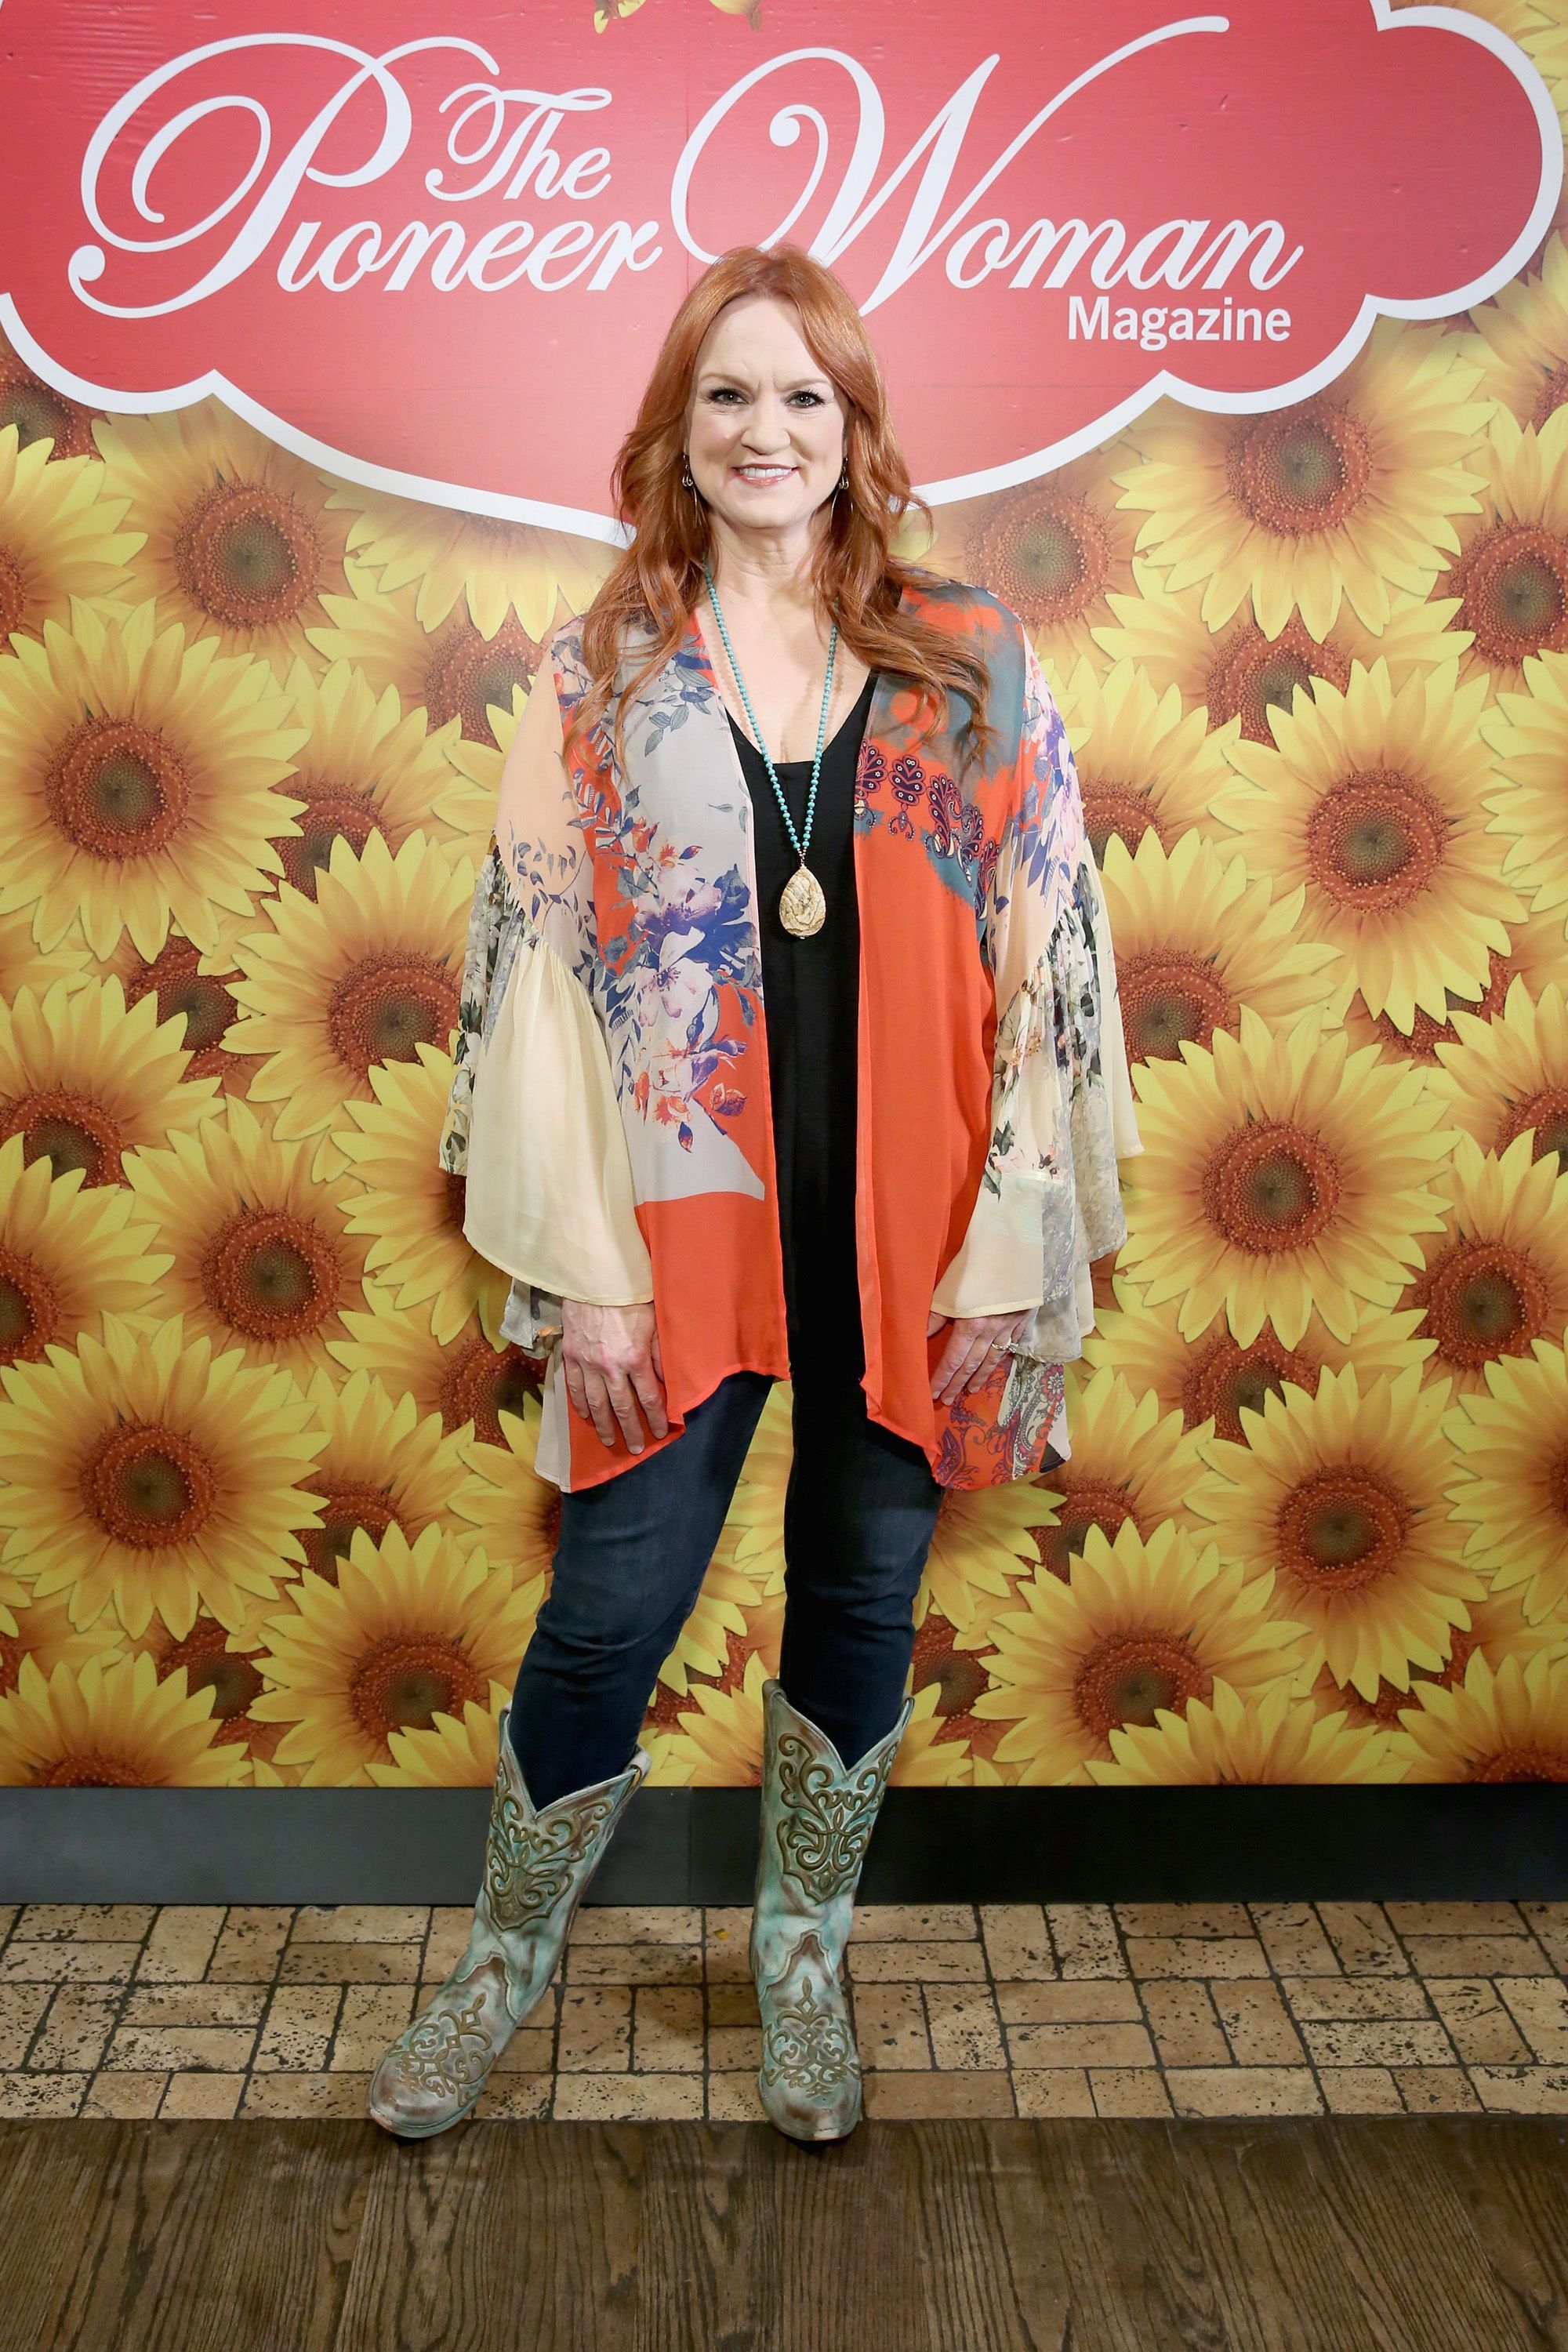  Ree Drummond attends The Pioneer Woman Magazine Celebration with Ree Drummond at The Mason Jar on June 6, 2017 in New York City. | Photo: Getty Images